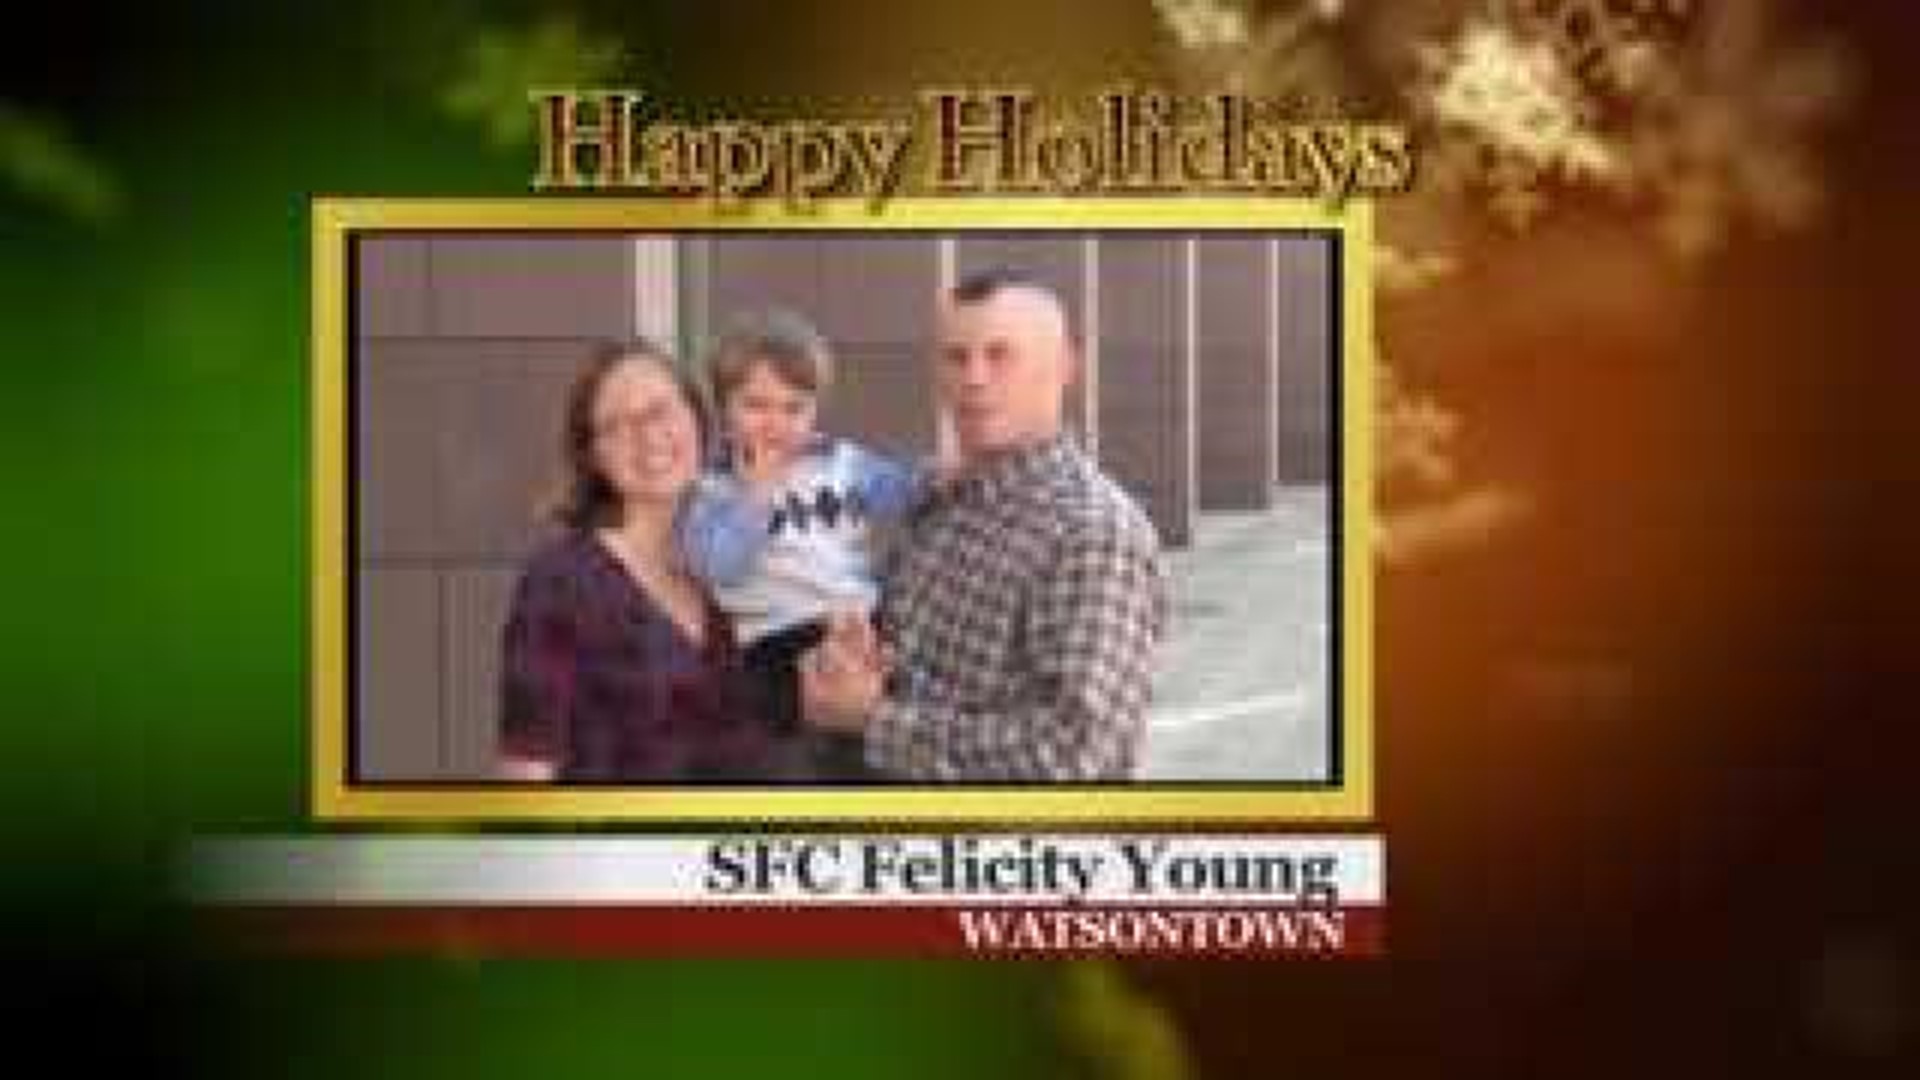 Military Greeting: SFC Felicity Young